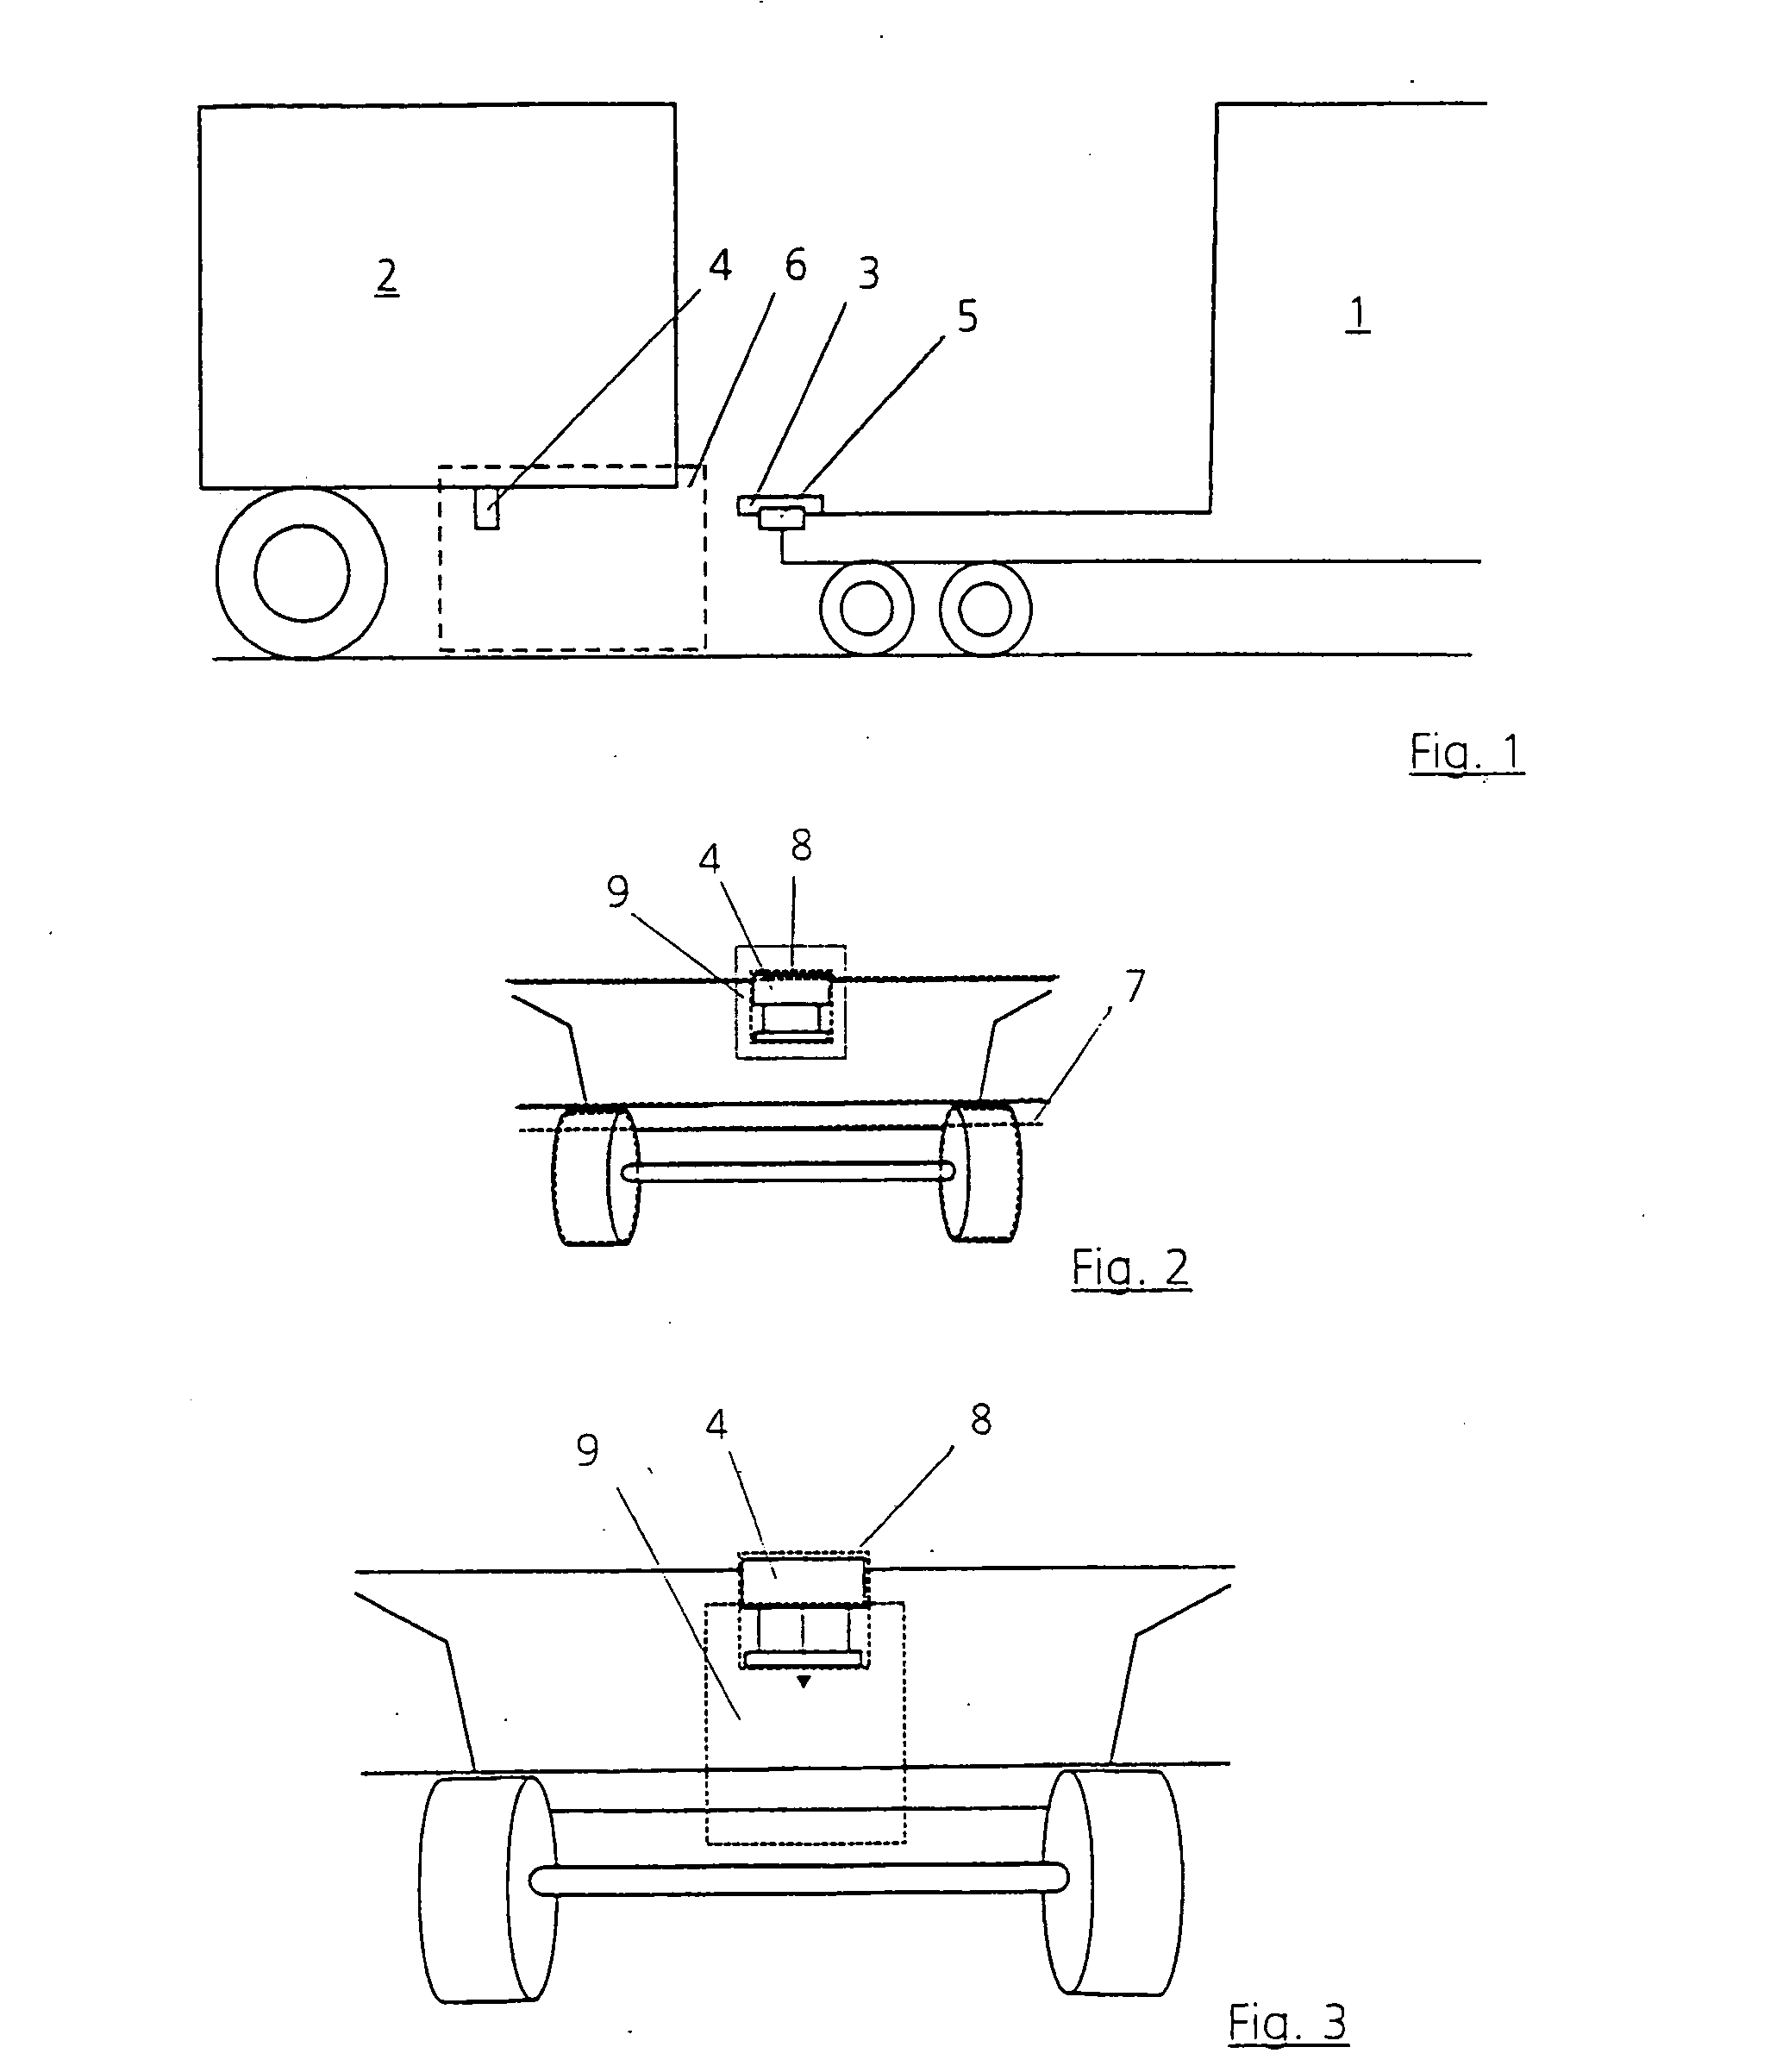 Process for coupling a trailer to a motor vehicle